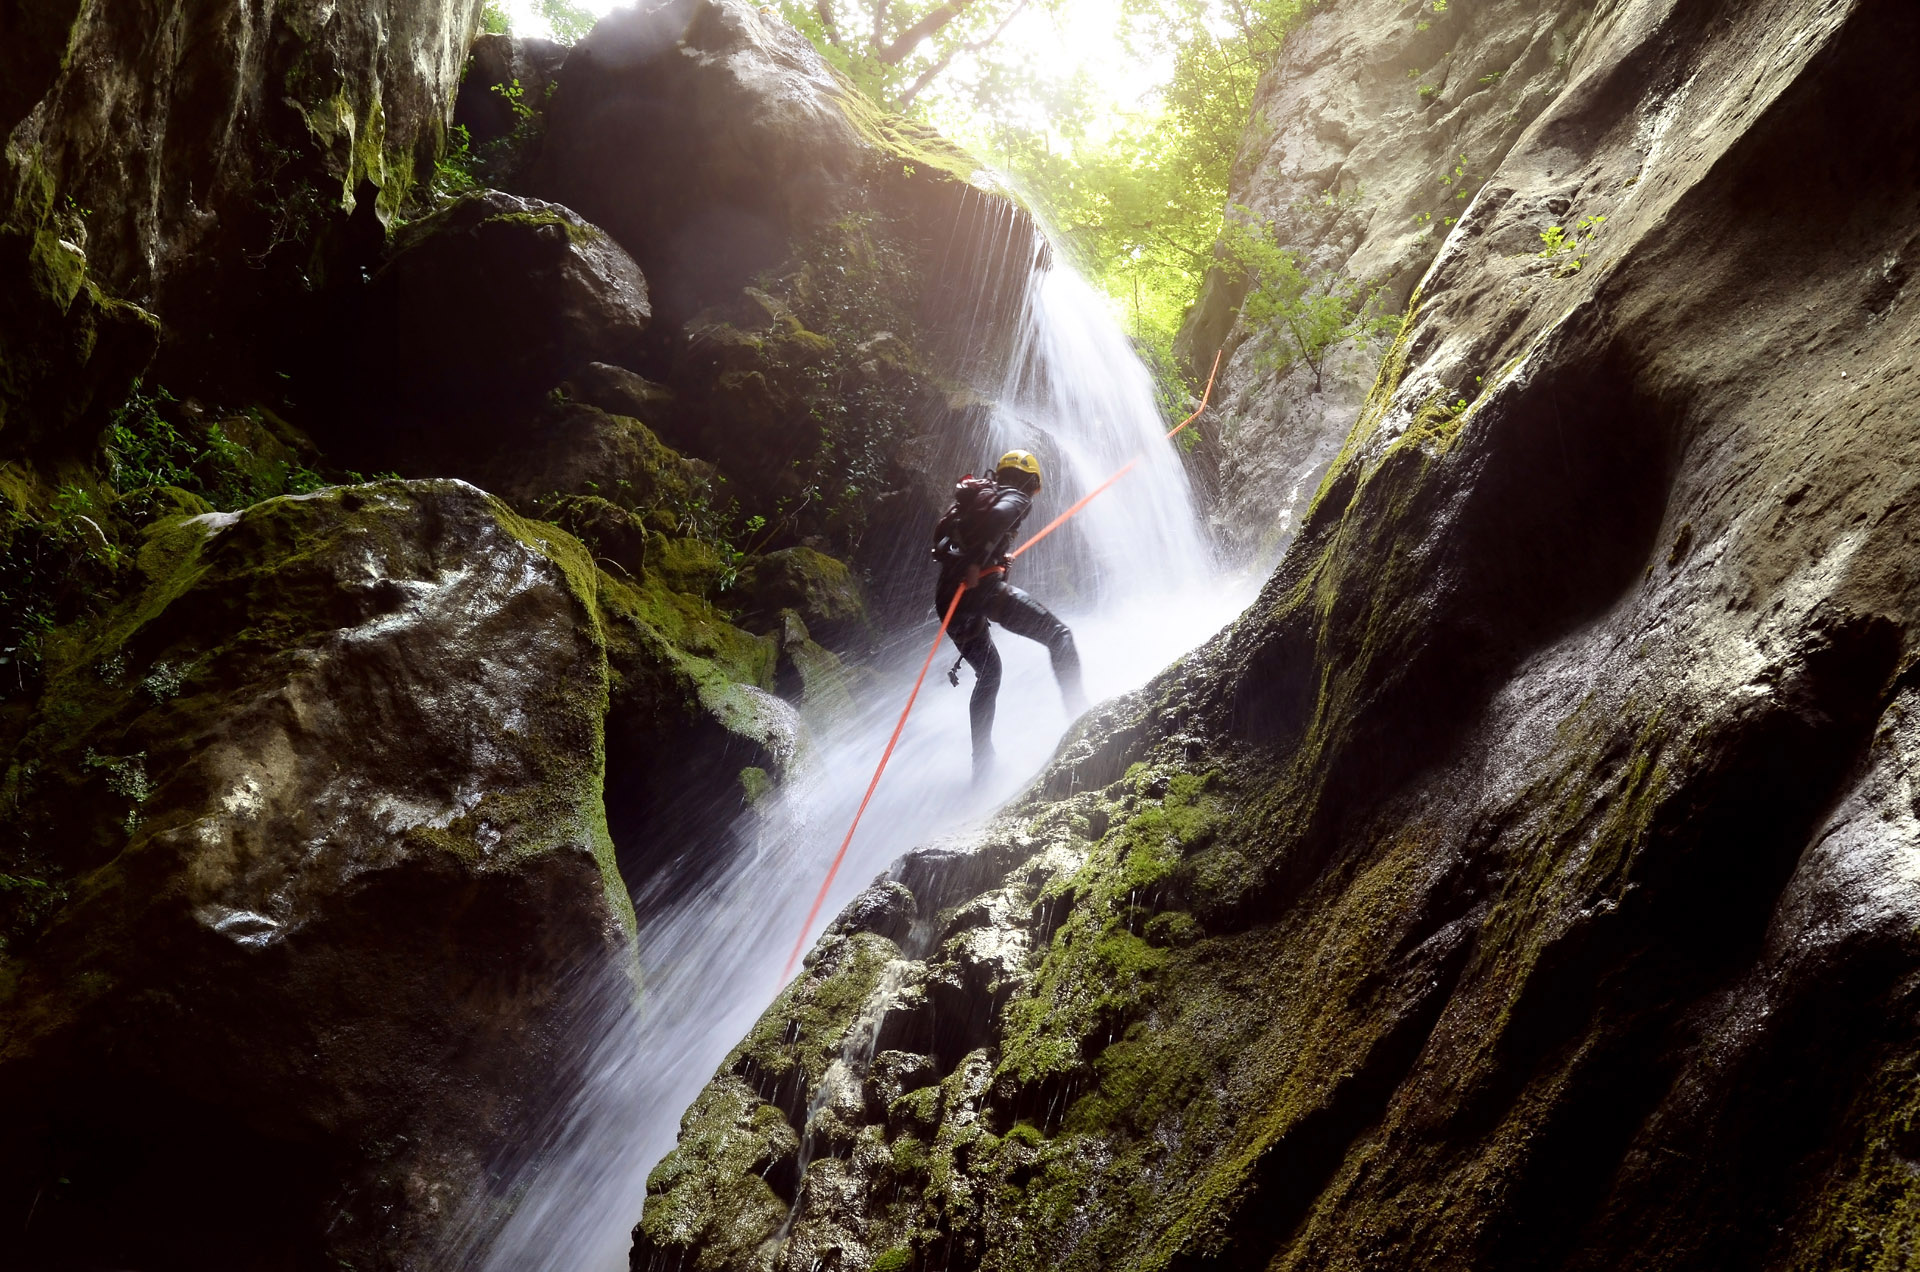 canyoning down an angled tropical waterfall